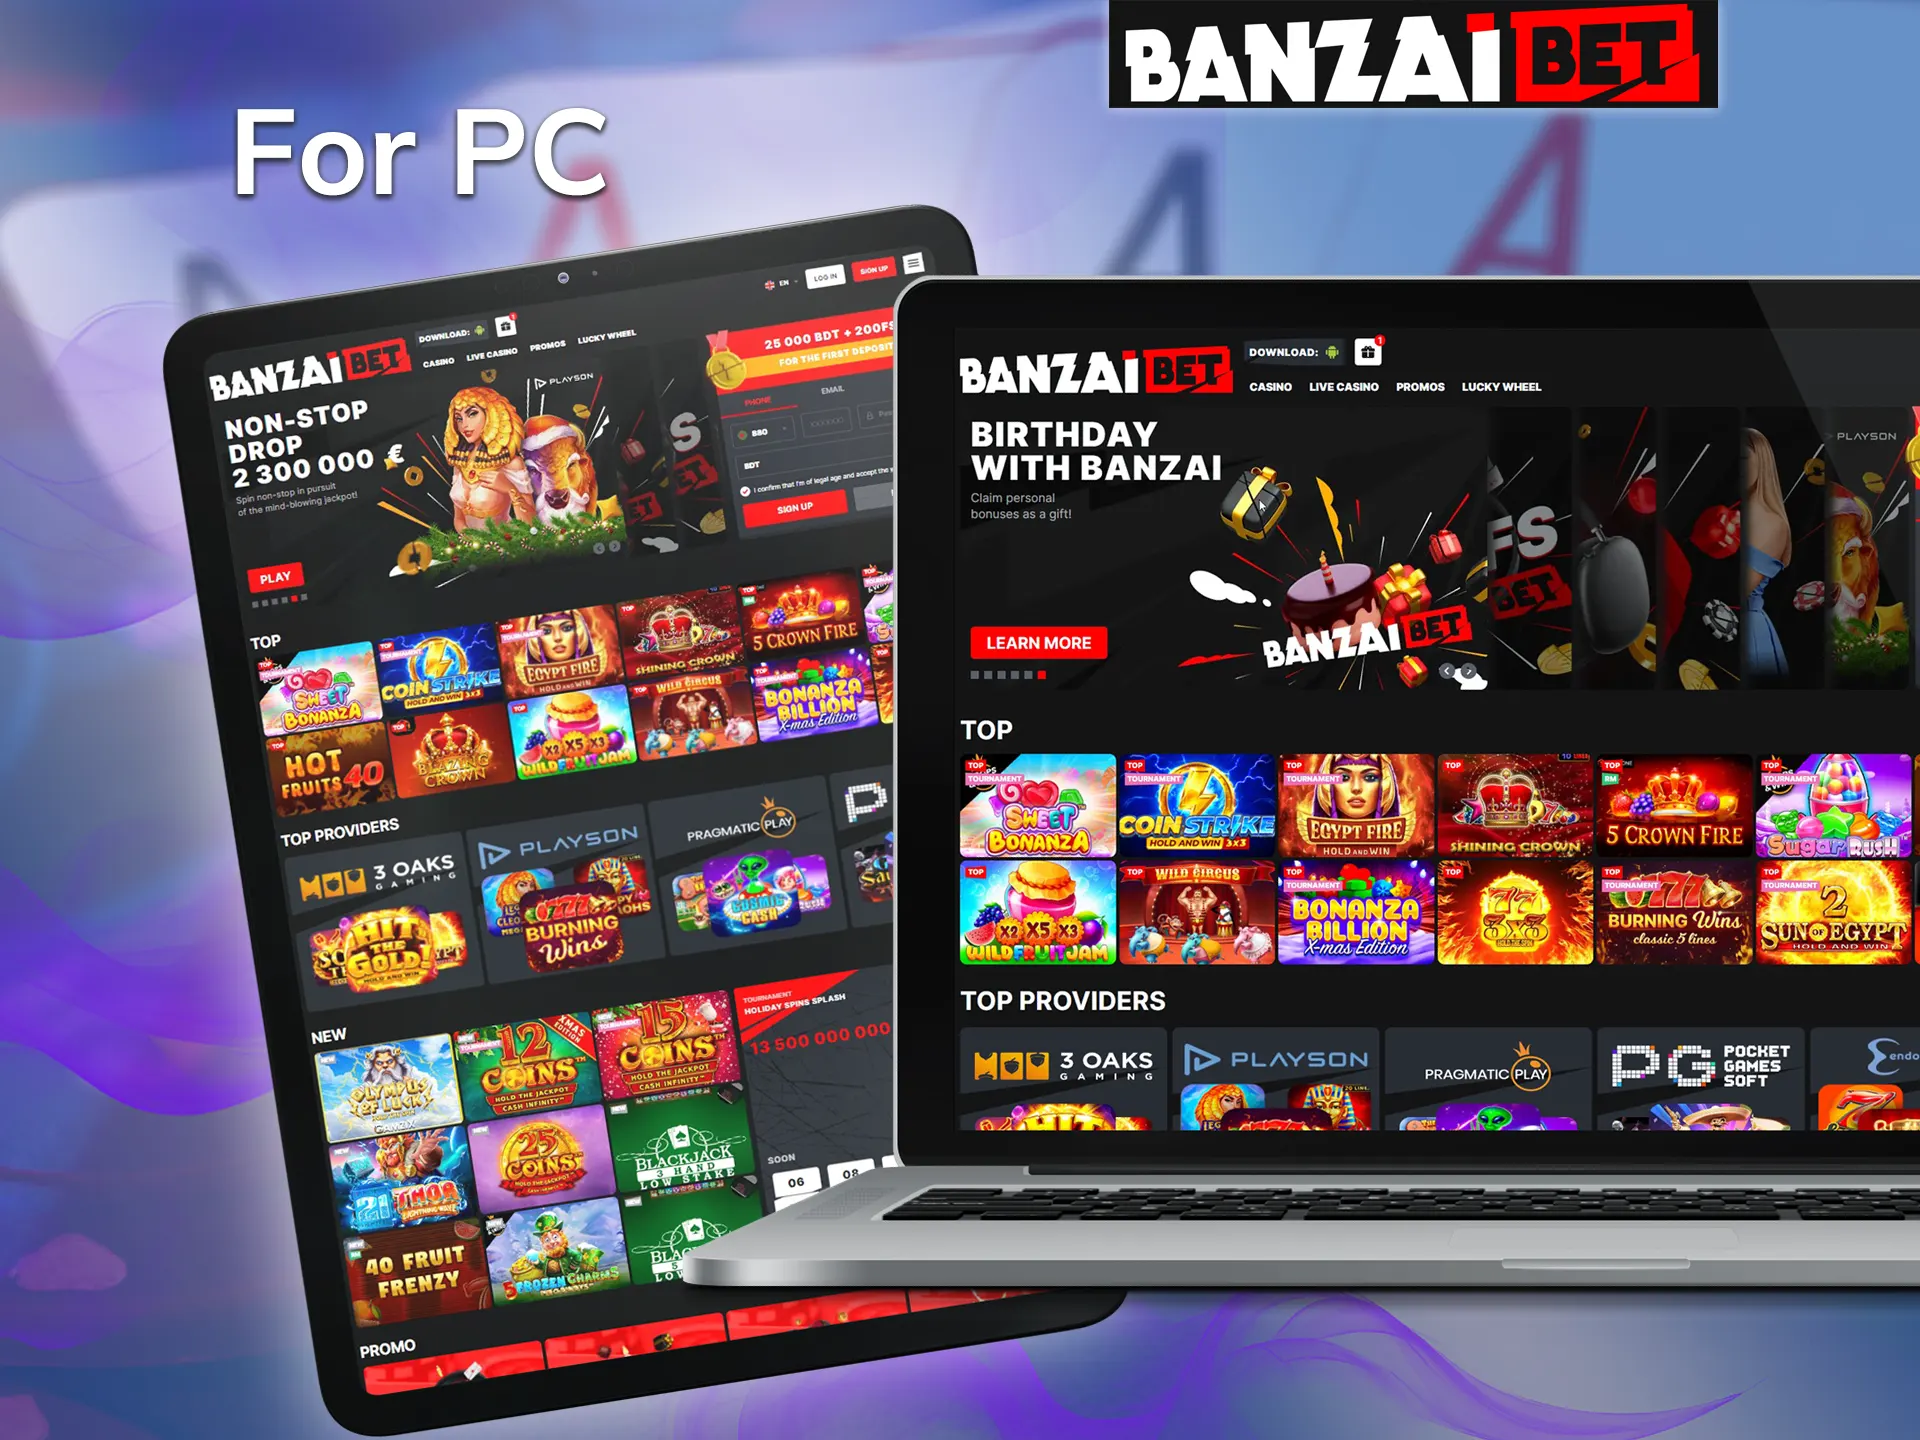 Install the Banzai Bet application for your personal computer.